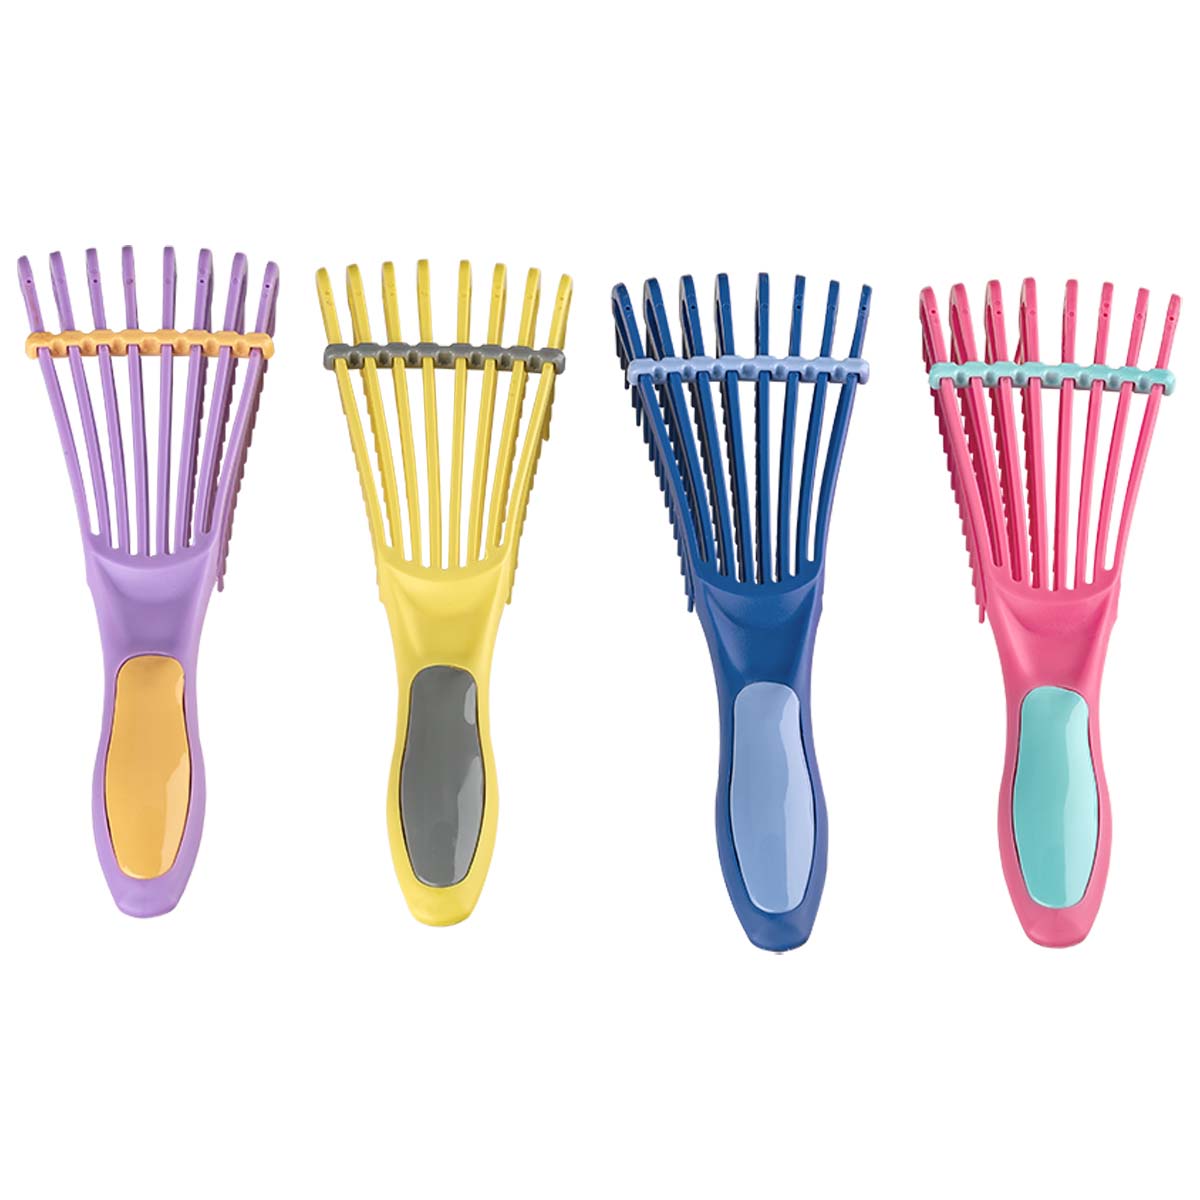 Dompel Caracol hairbrush, specially developed for the curl brushing routine, antistatic brush with light, soft and flexible bristles. 4 pieces (yellow, pink, purple, blue) - depilcompany